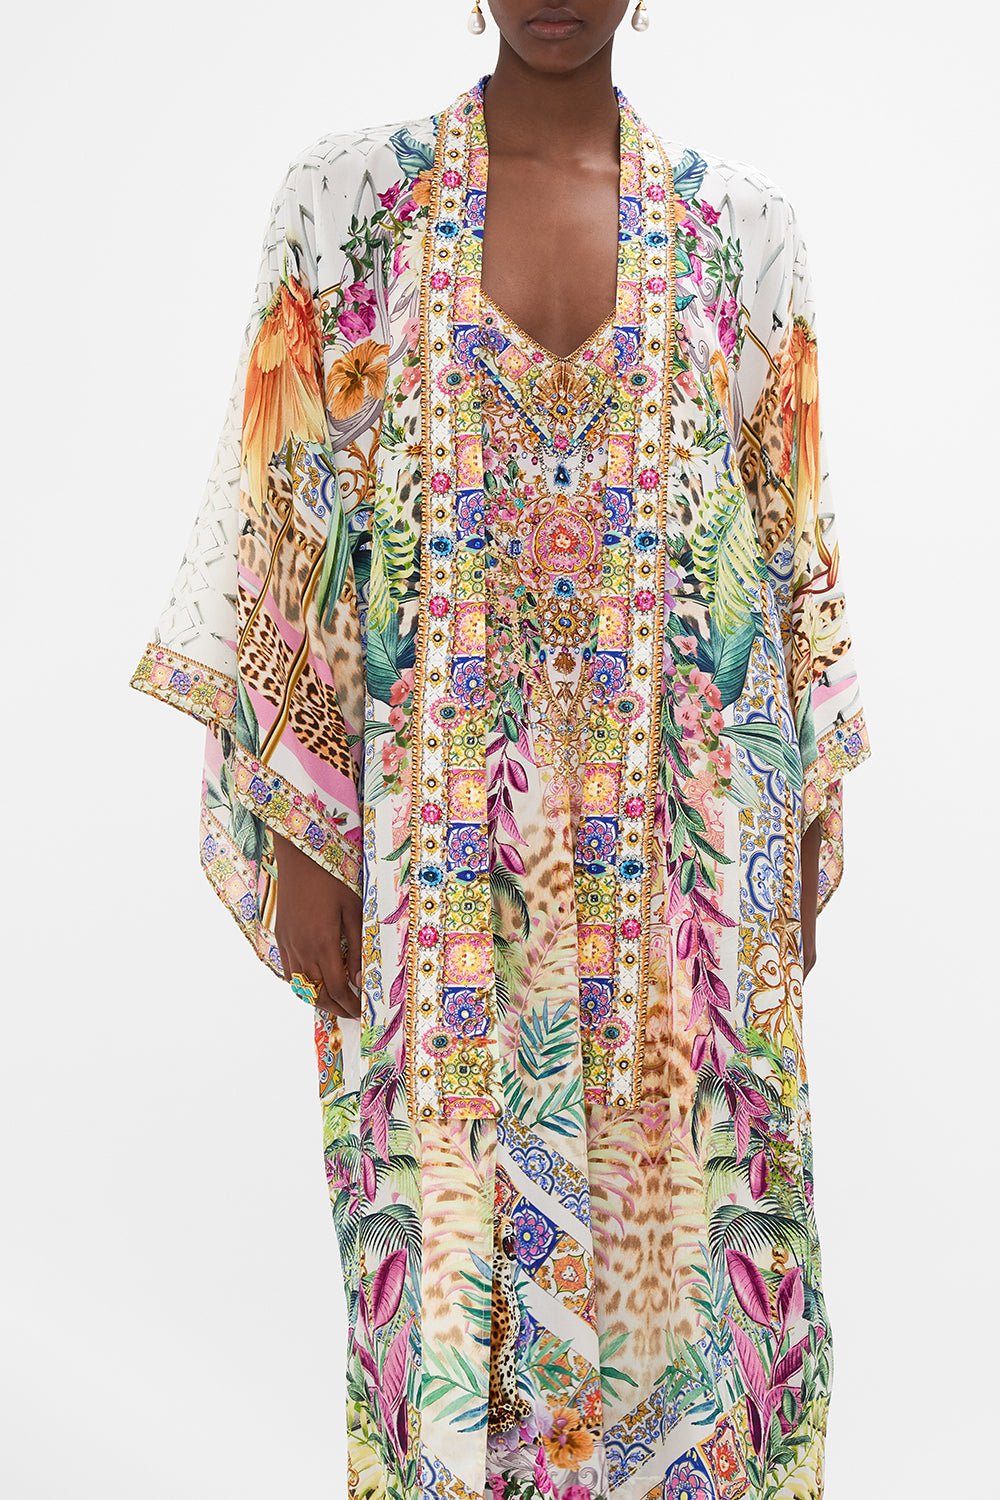 Crop view of model wearing CAMILLA floral silk kimono in Flowers of Neptune print